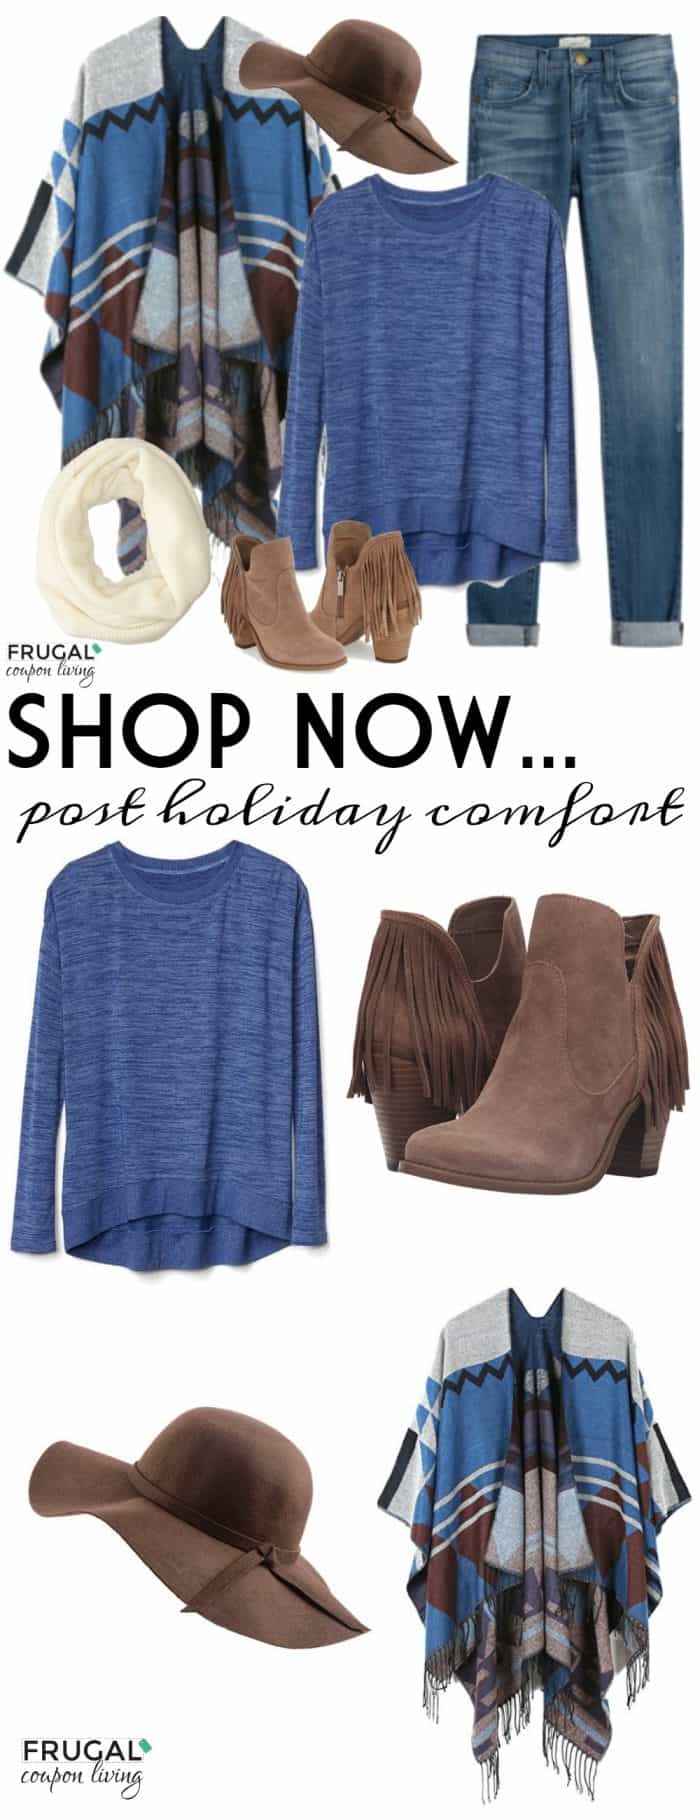 post-holiday-comfort-outfit-frugal-coupon-living-frugal-fashion-friday-long